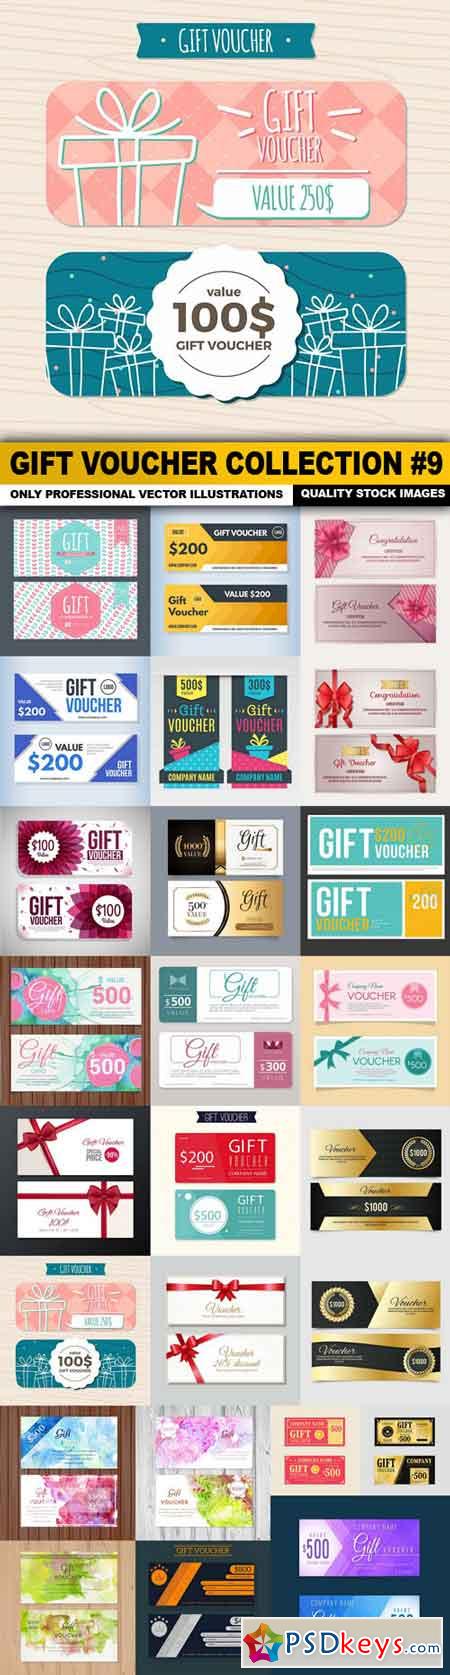 Gift Voucher Collection #9 - 25 Vector